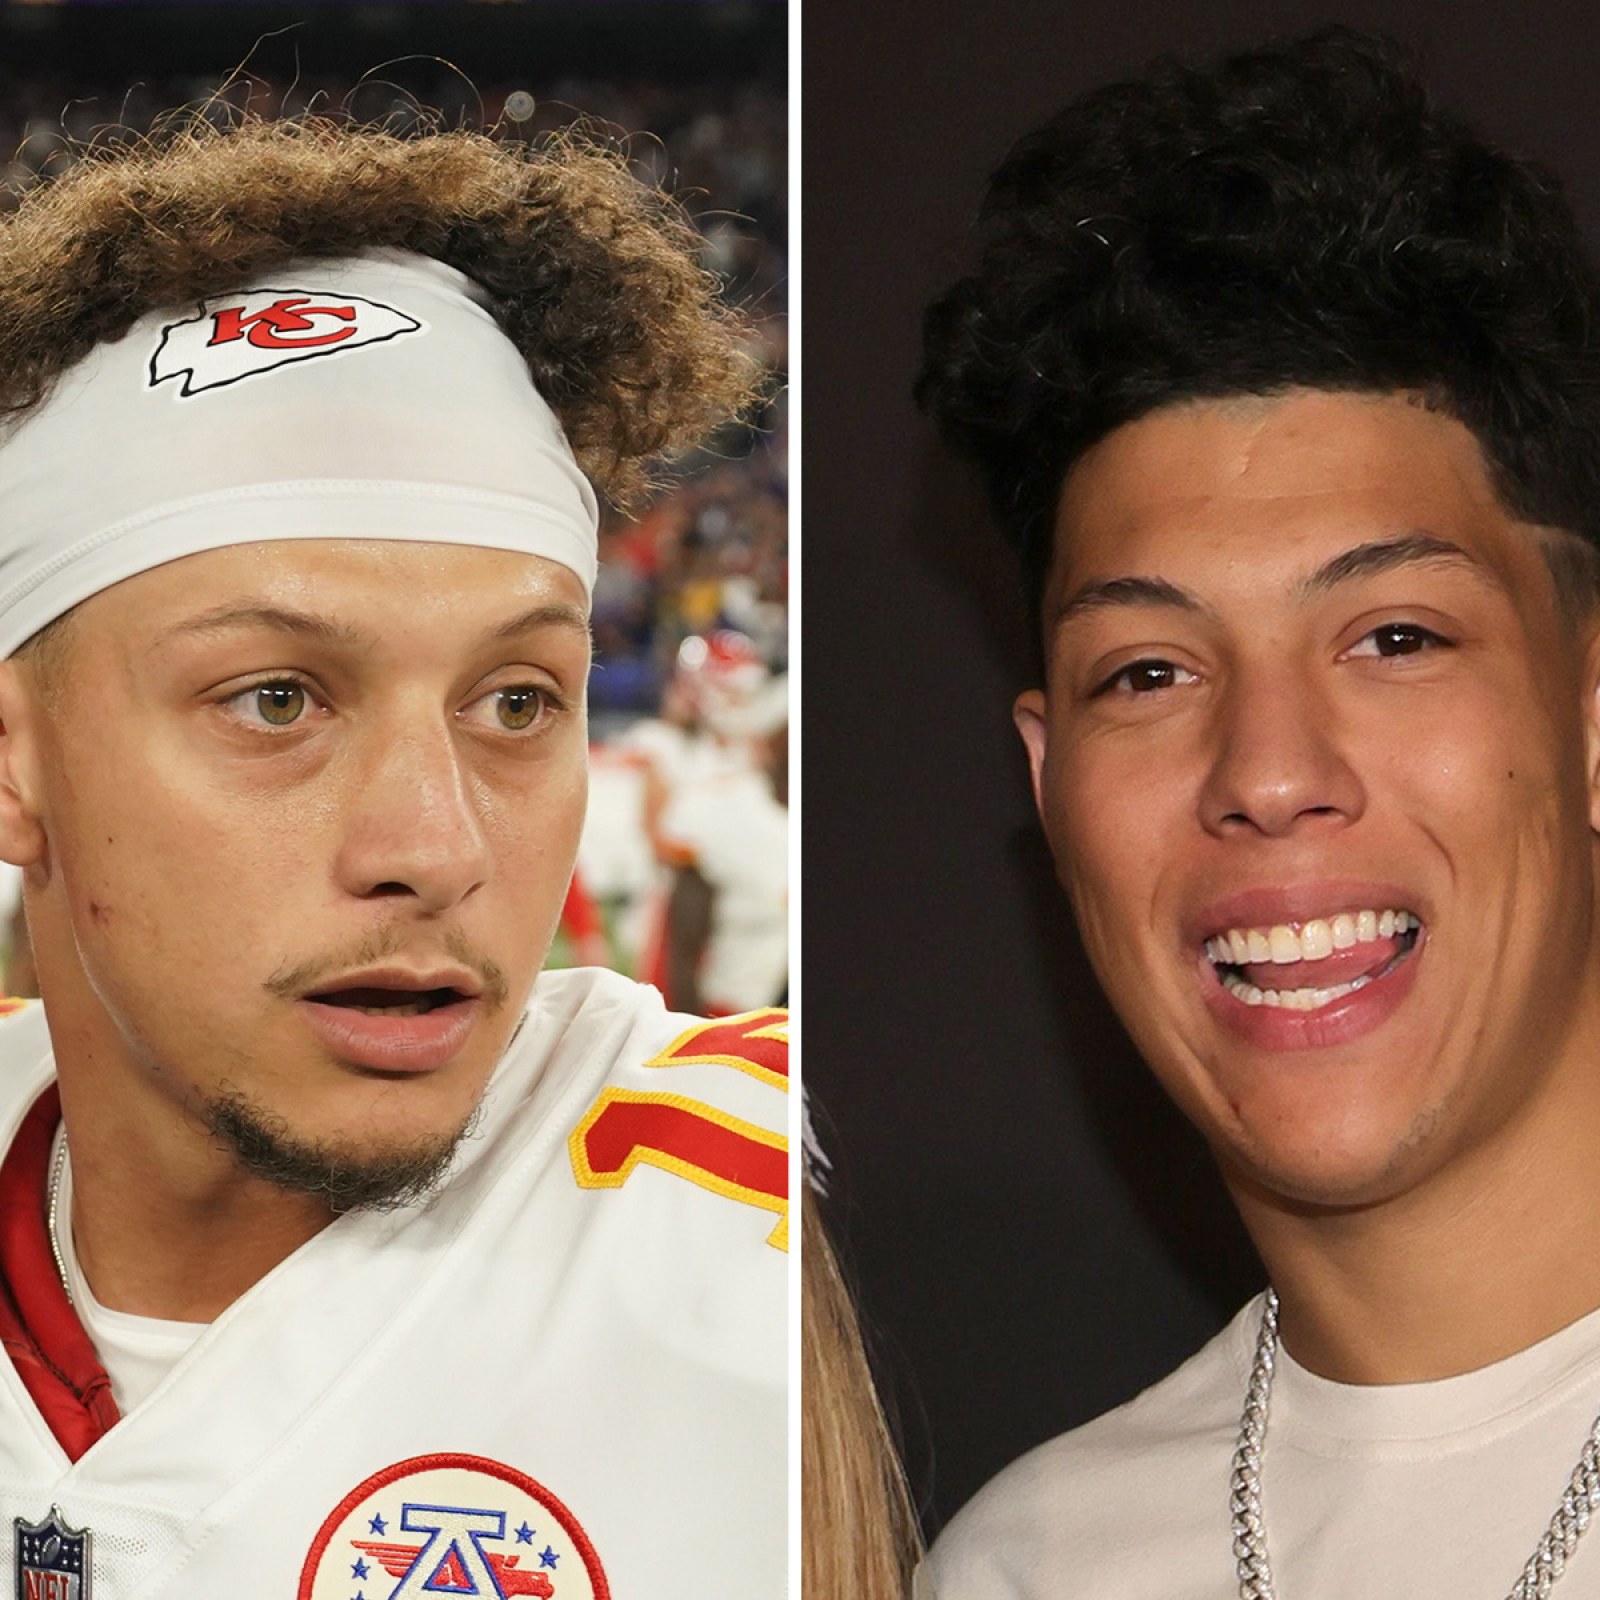 Patrick Mahomes' Brother Told to 'Get a Job' After Super Bowl Celebrations